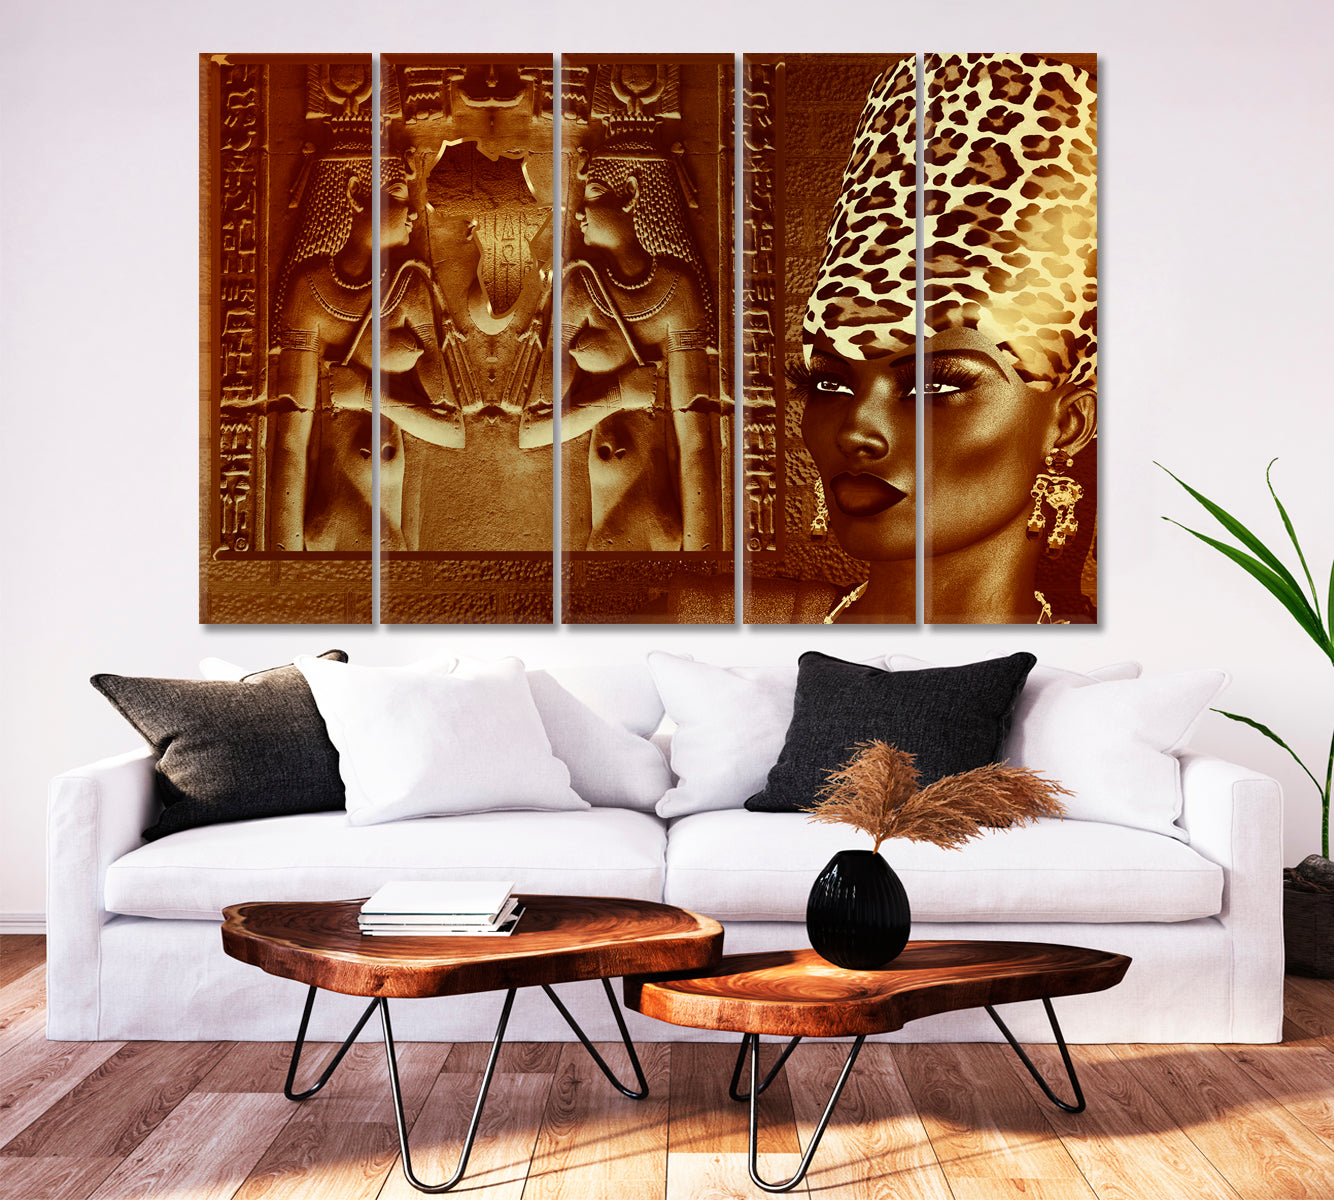 Egyptian Goddess Queen African Style Canvas Print Artesty 5 panels 36" x 24" 